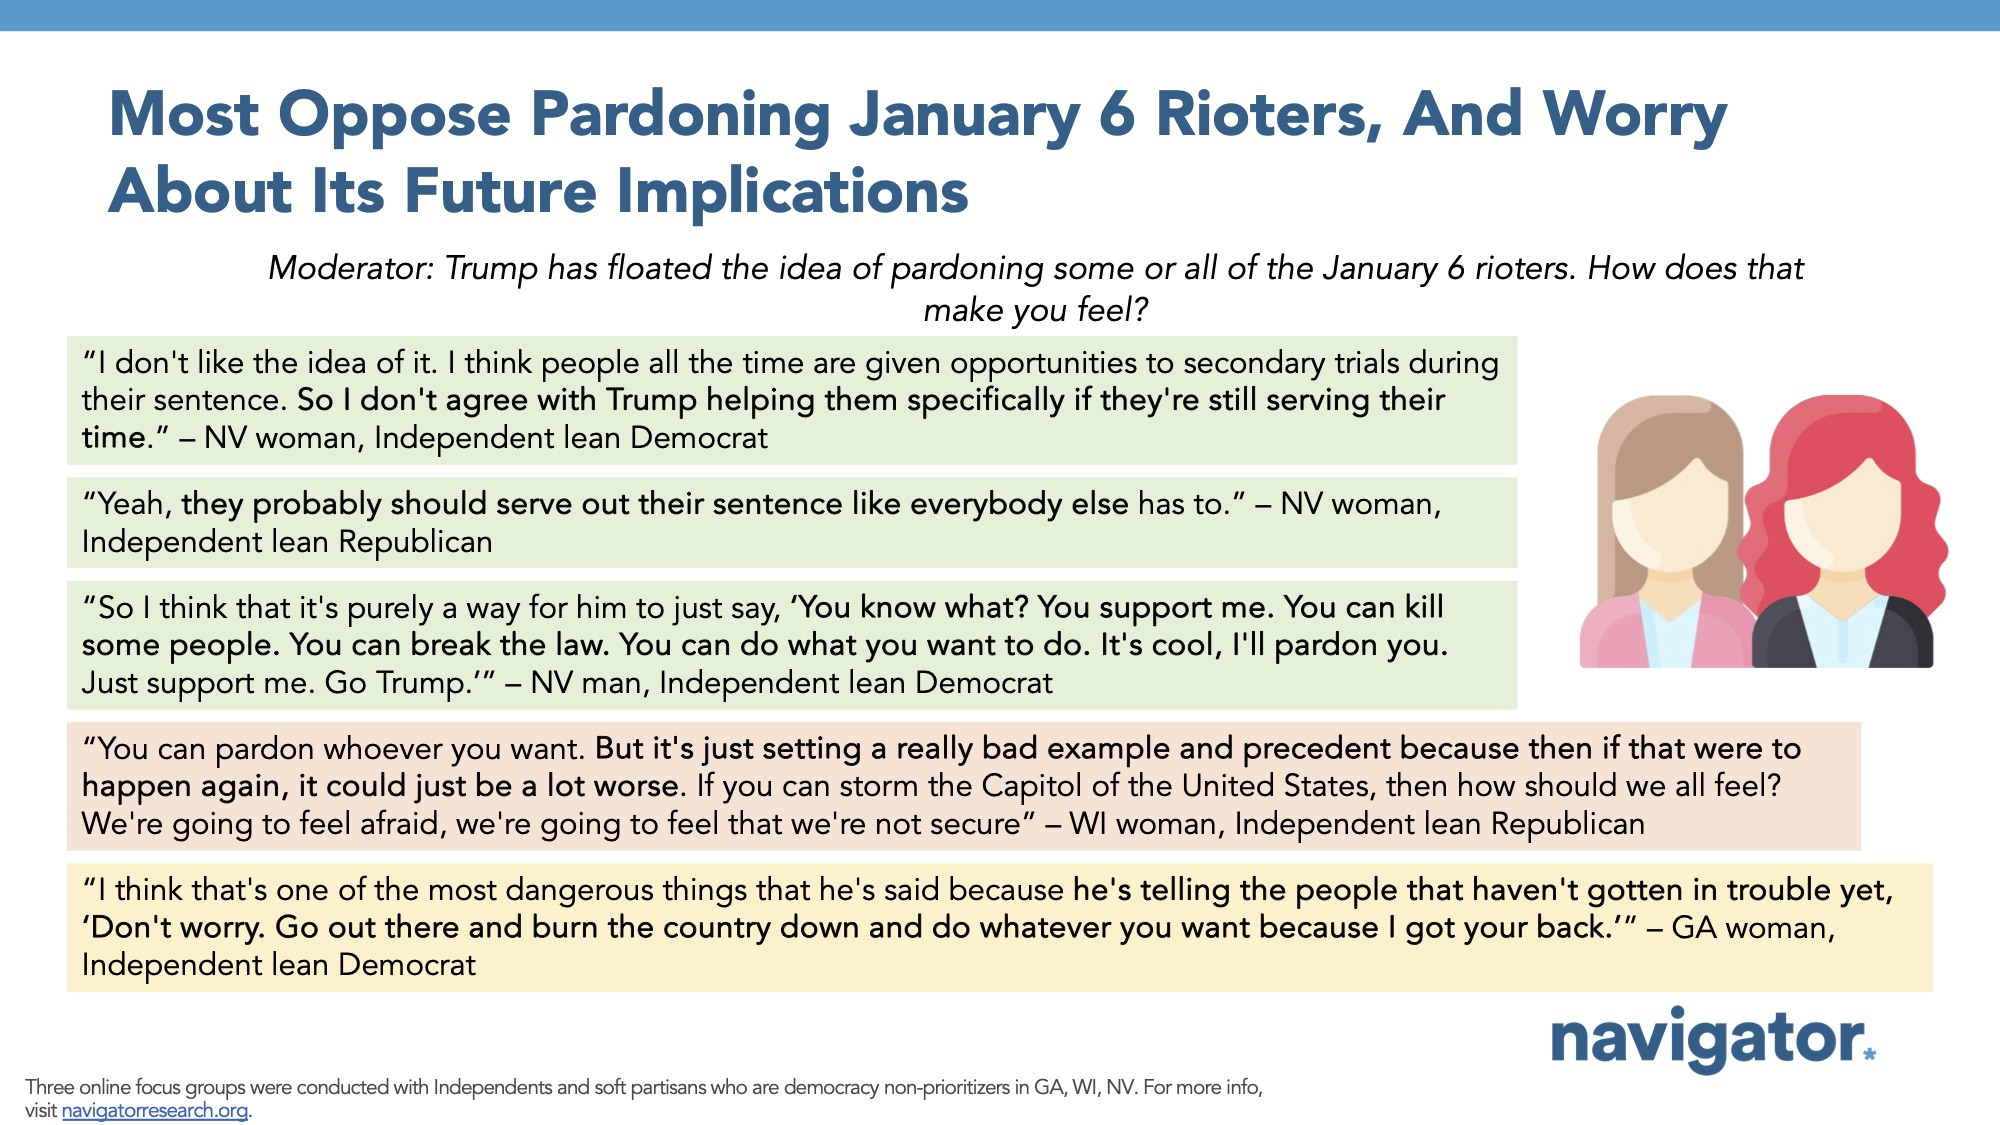 Focus group report slide titled: Most Oppose Pardoning January 6 Rioters, And Worry About Its Future Implications